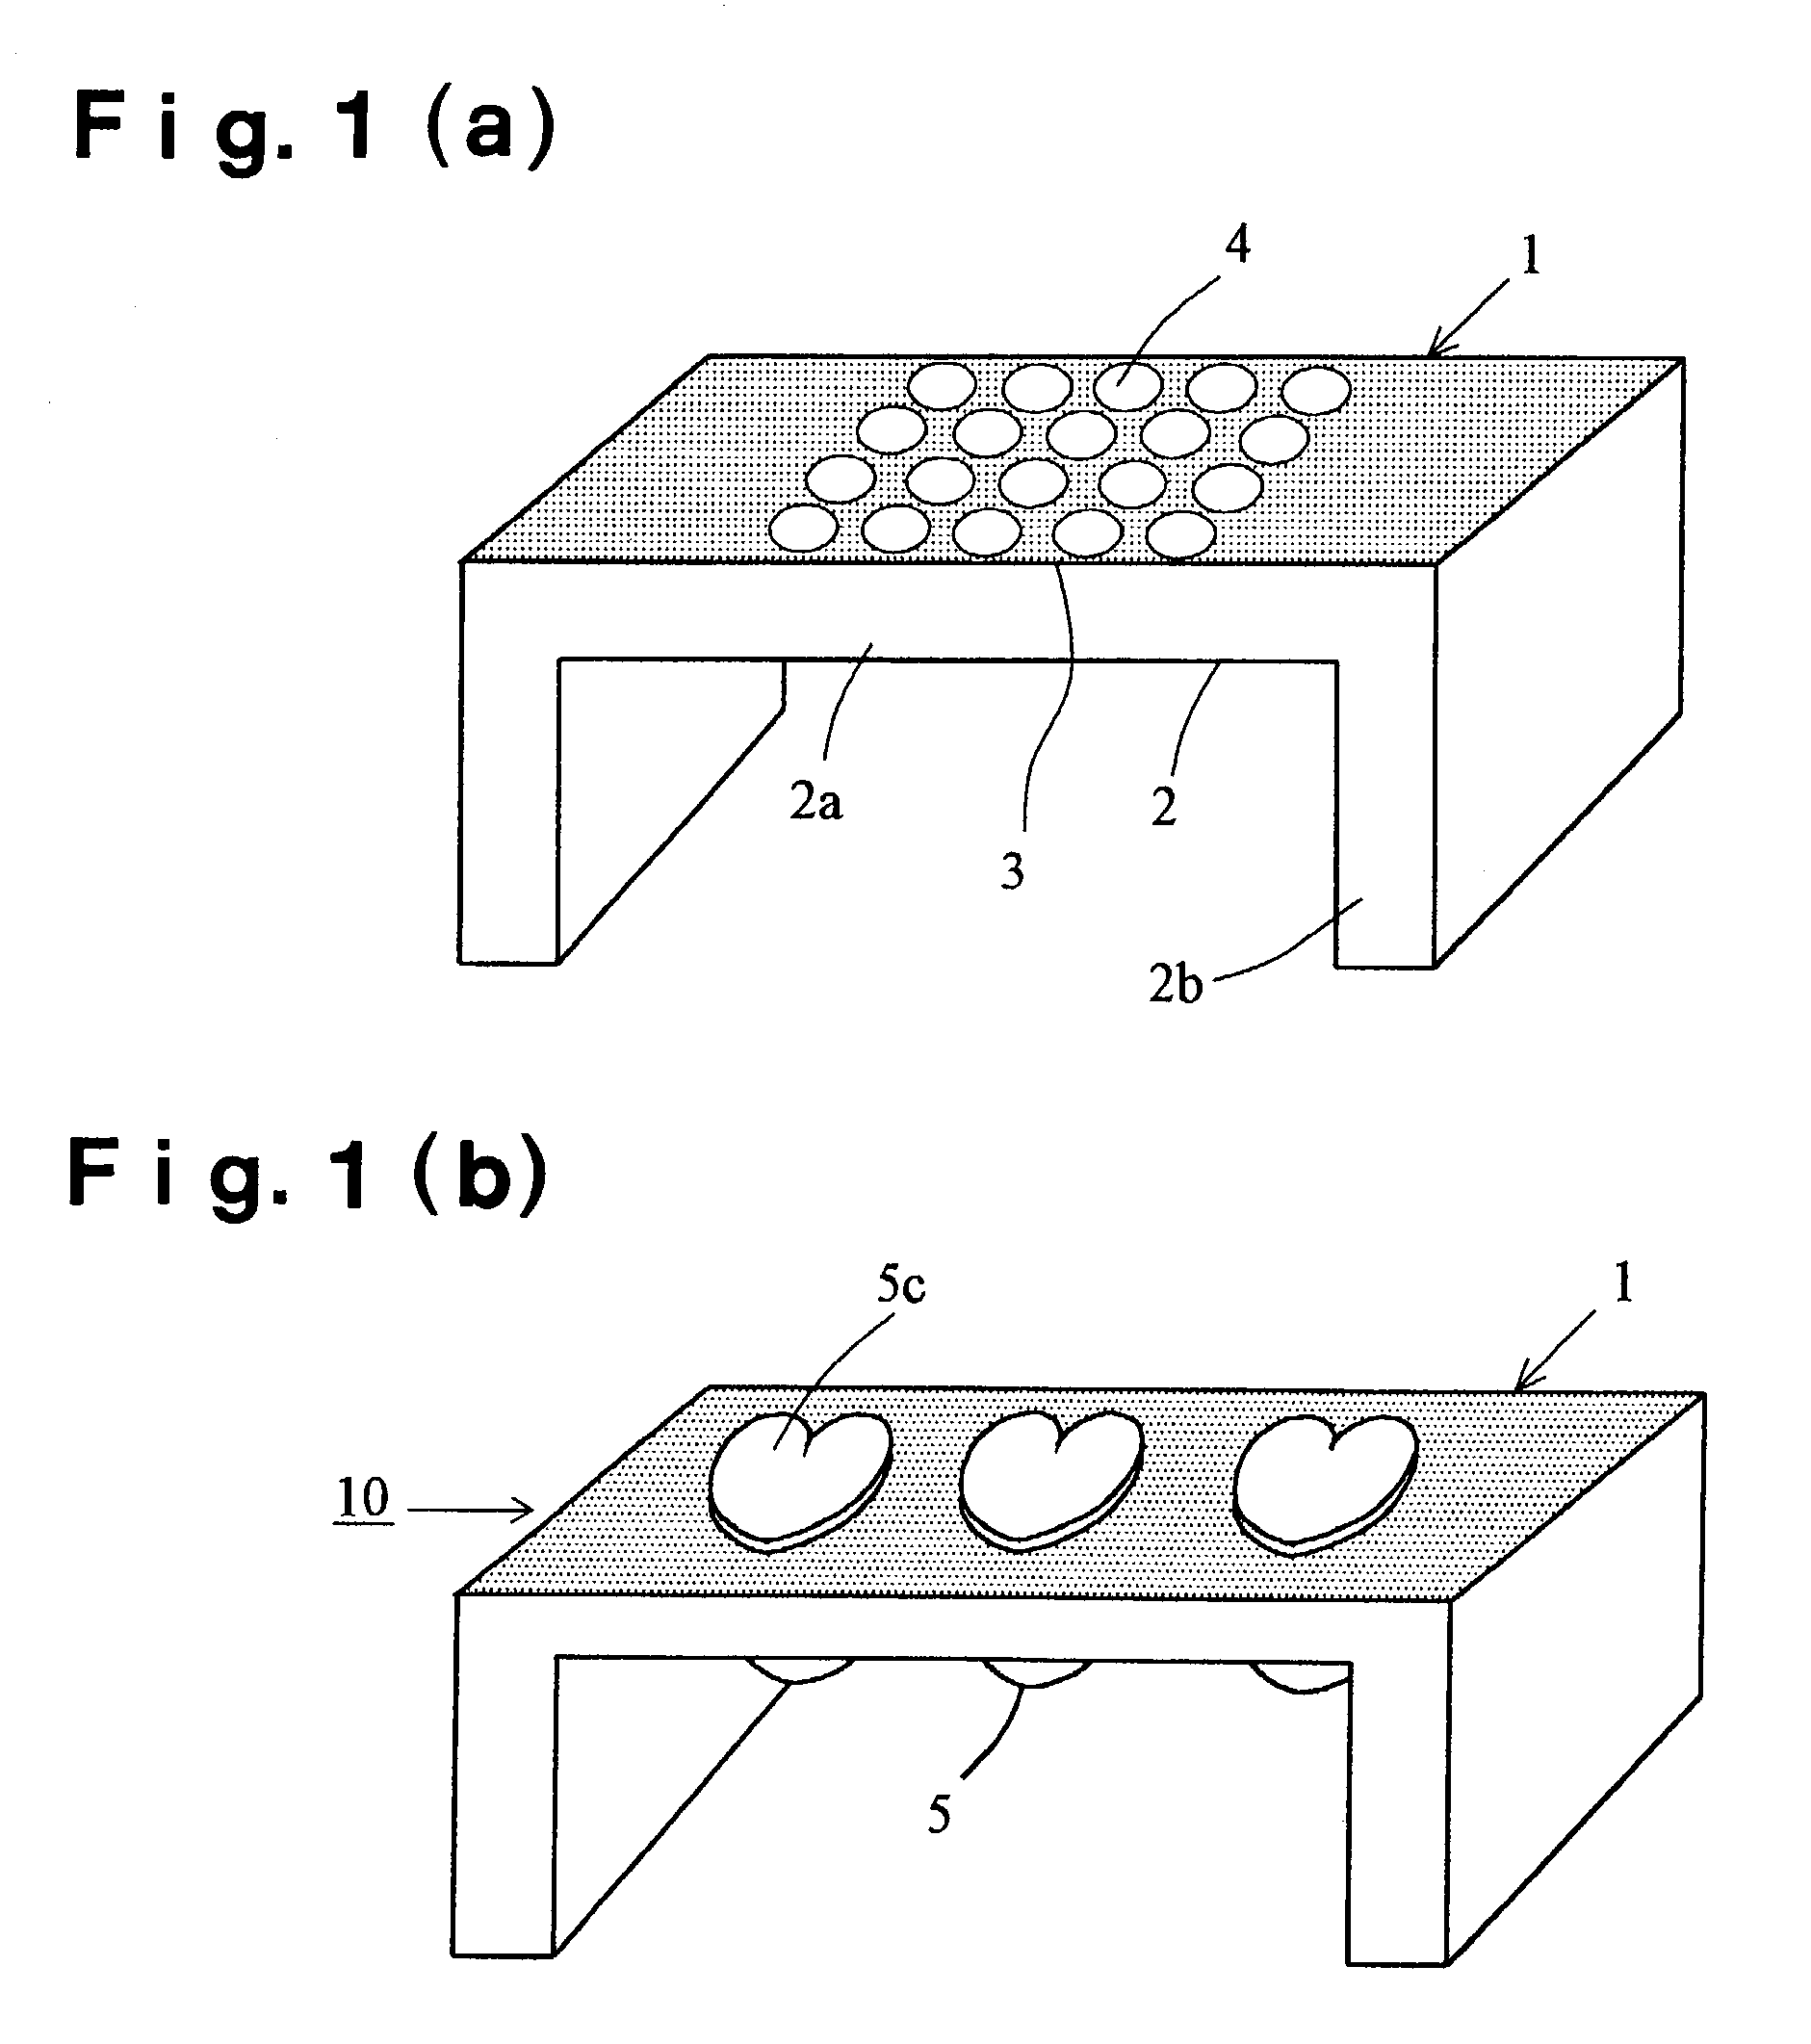 Apparatus and process for securing, analyzing and sorting materials, and sorted products